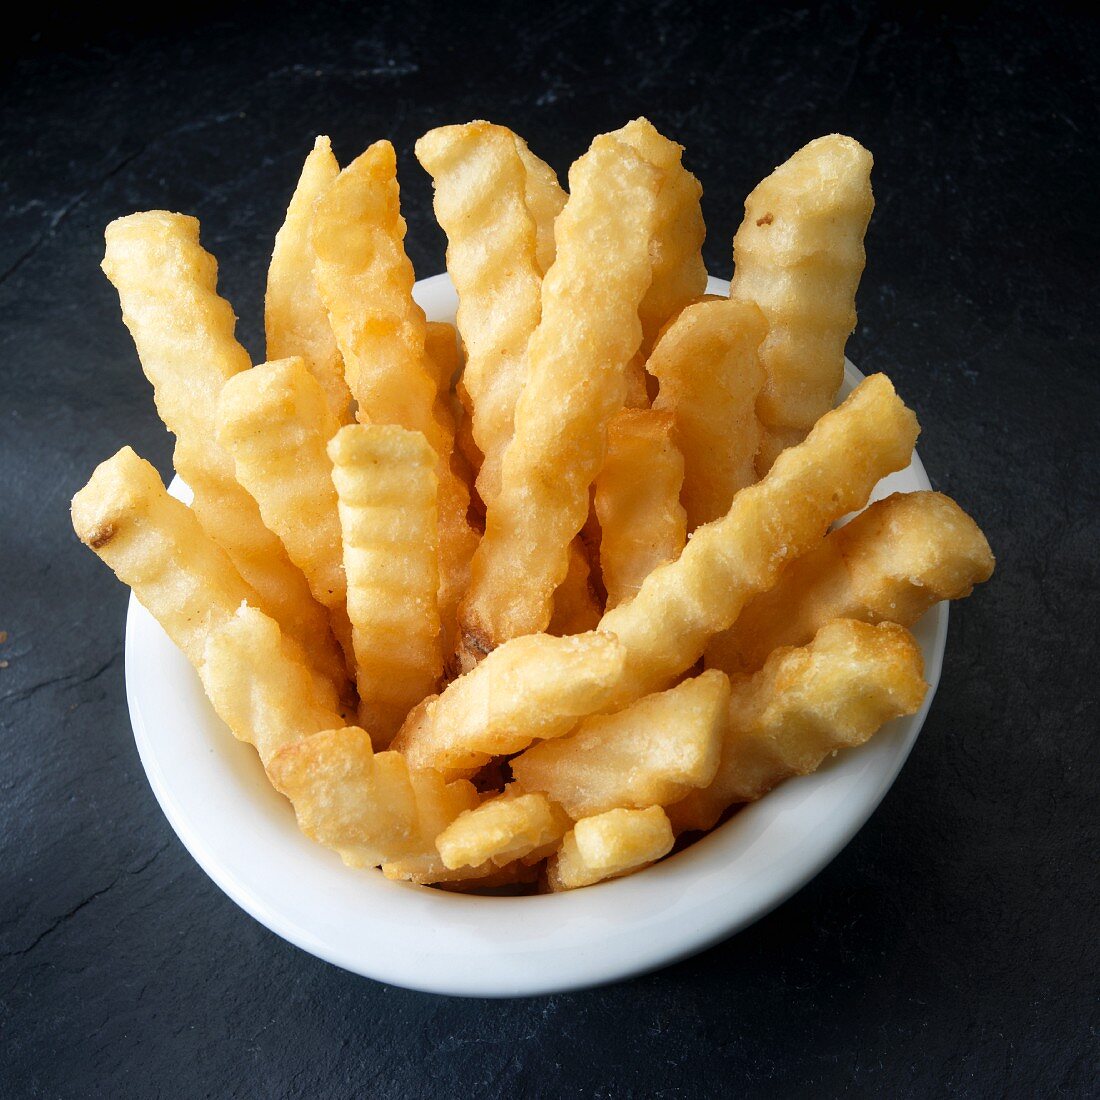 Crinkle cut french fried potatoes